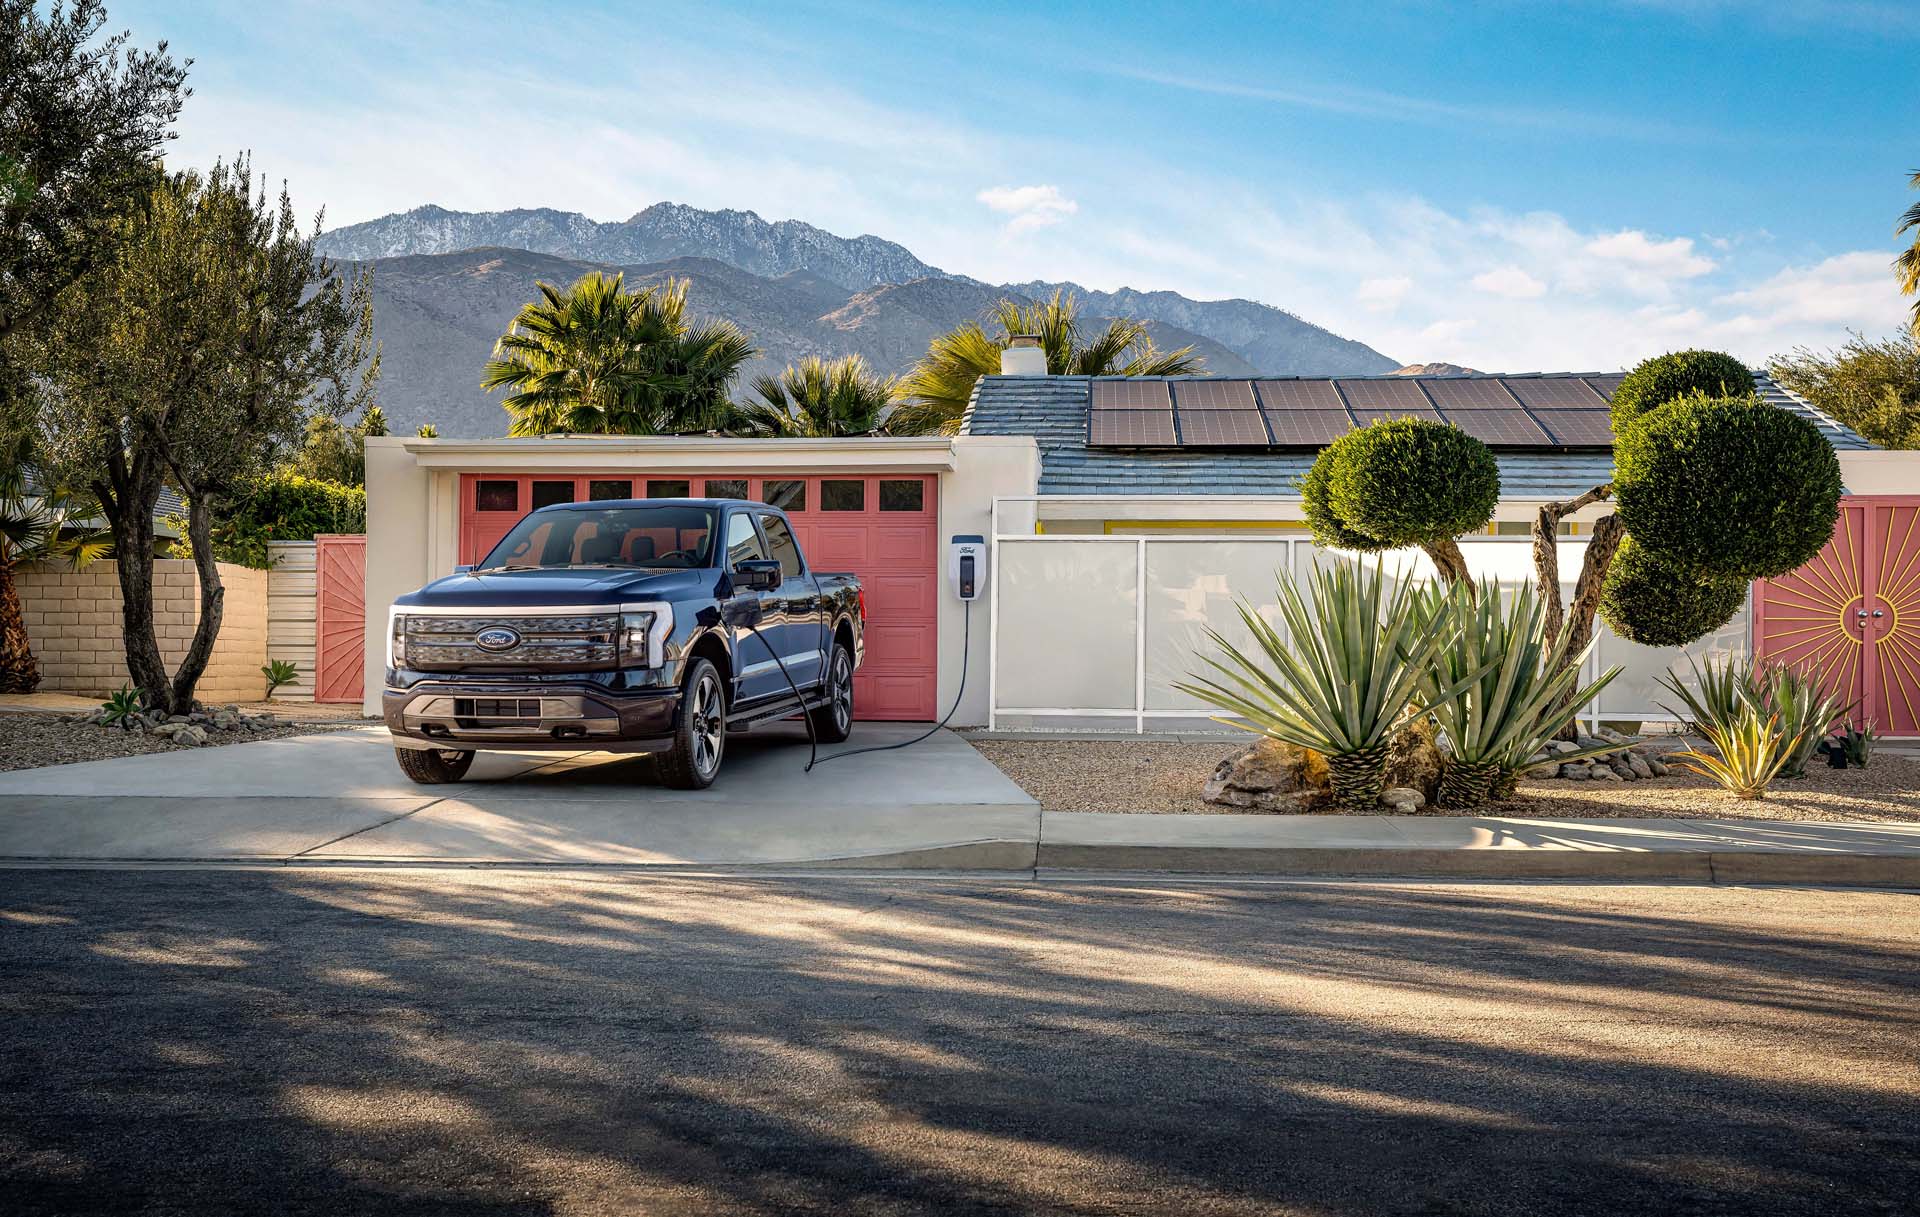 Ford F-150 Lightning will team with home solar, bypass brownouts: Here’s howFord F-150 Lightning will team with home solar, bypass brownouts: Here’s how